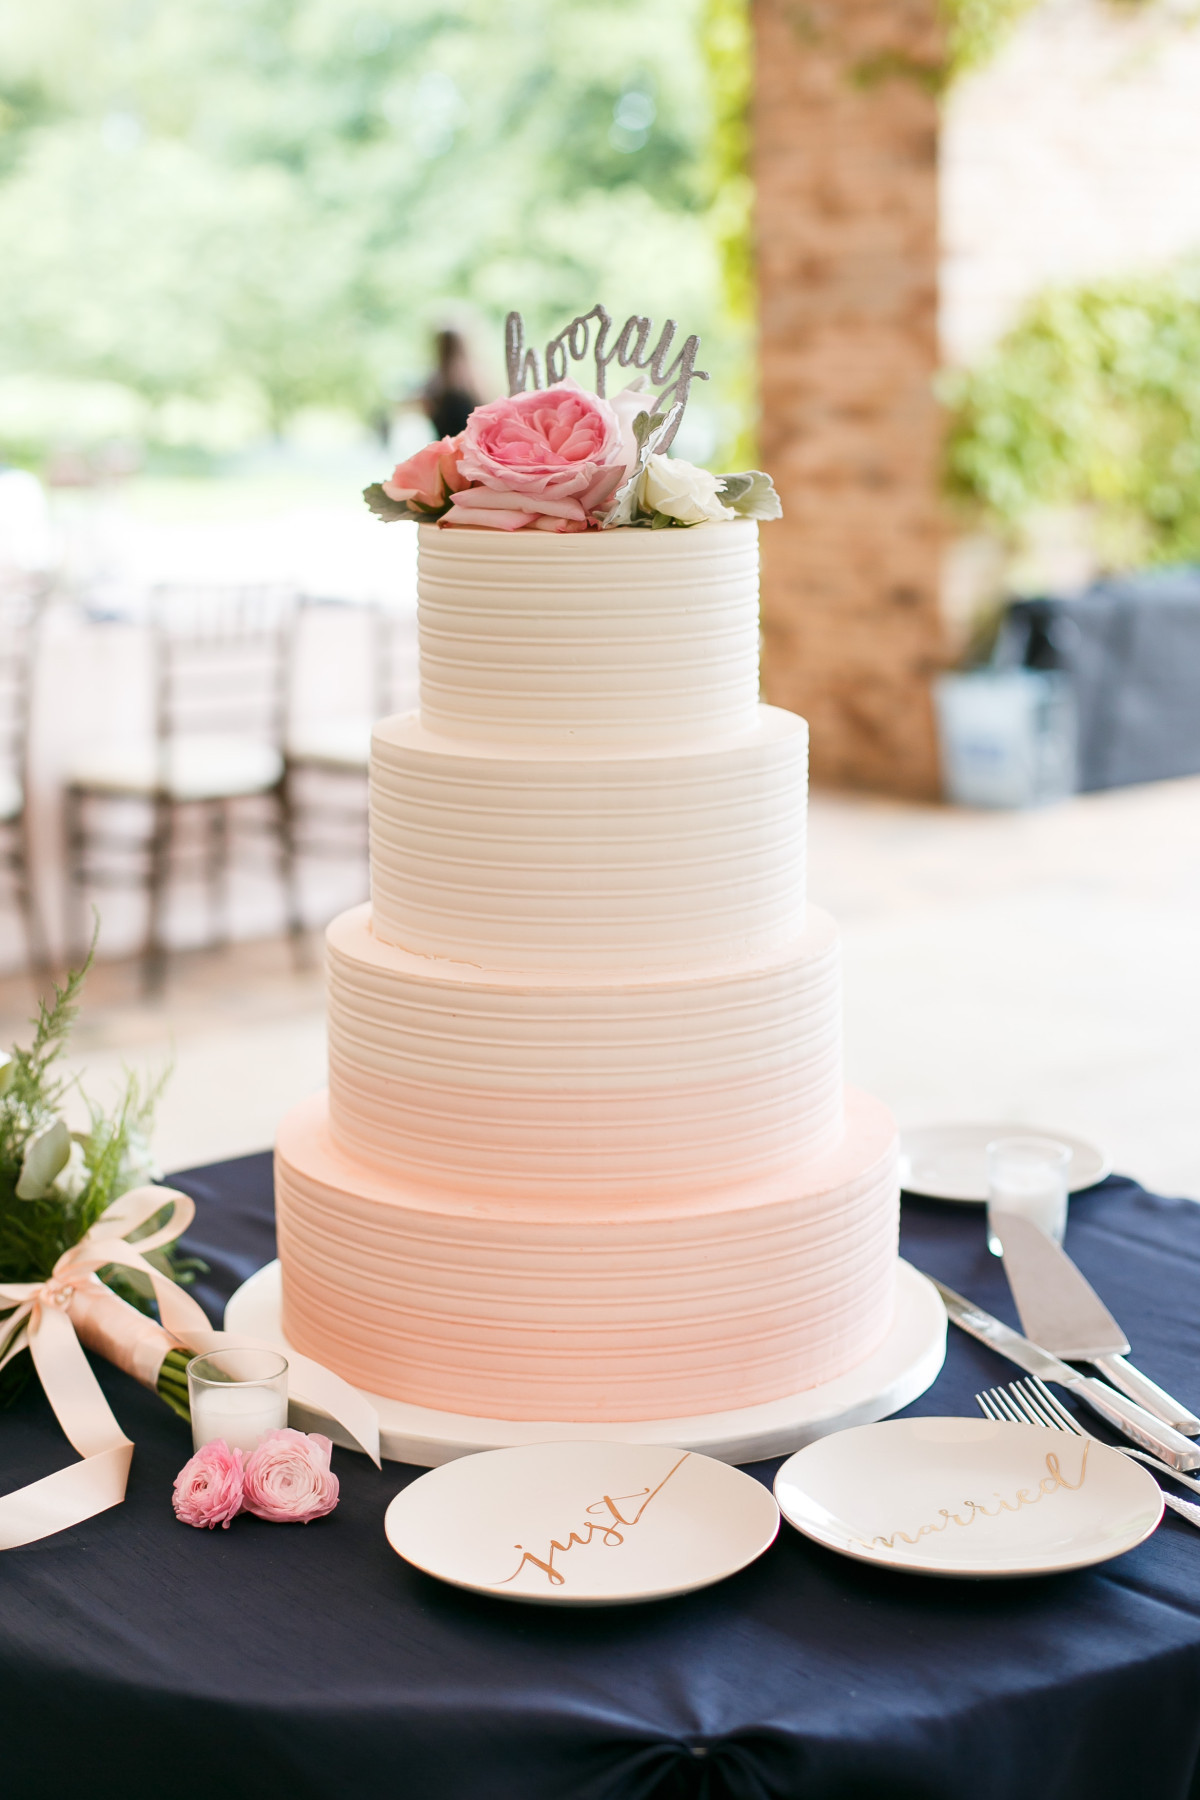 Wedding Cakes With Buttercream Frosting
 Pink Ombre Buttercream Wedding Cake